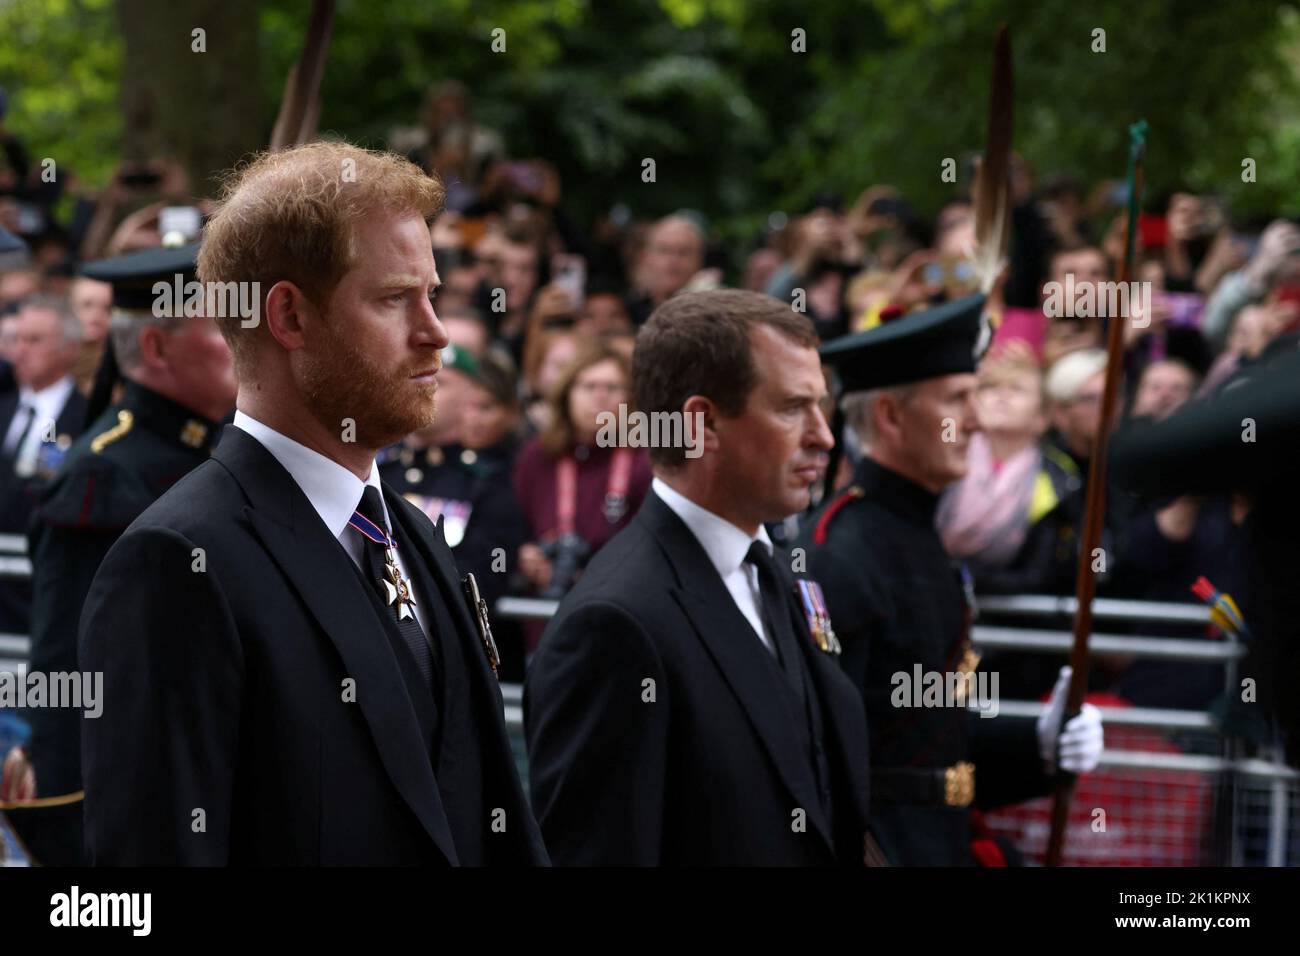 Britain's Prince Harry, Duke of Sussex attends the state funeral and burial of Britain's Queen Elizabeth, in London, Britain, September 19, 2022. REUTERS/Tom Nicholson? Stock Photo